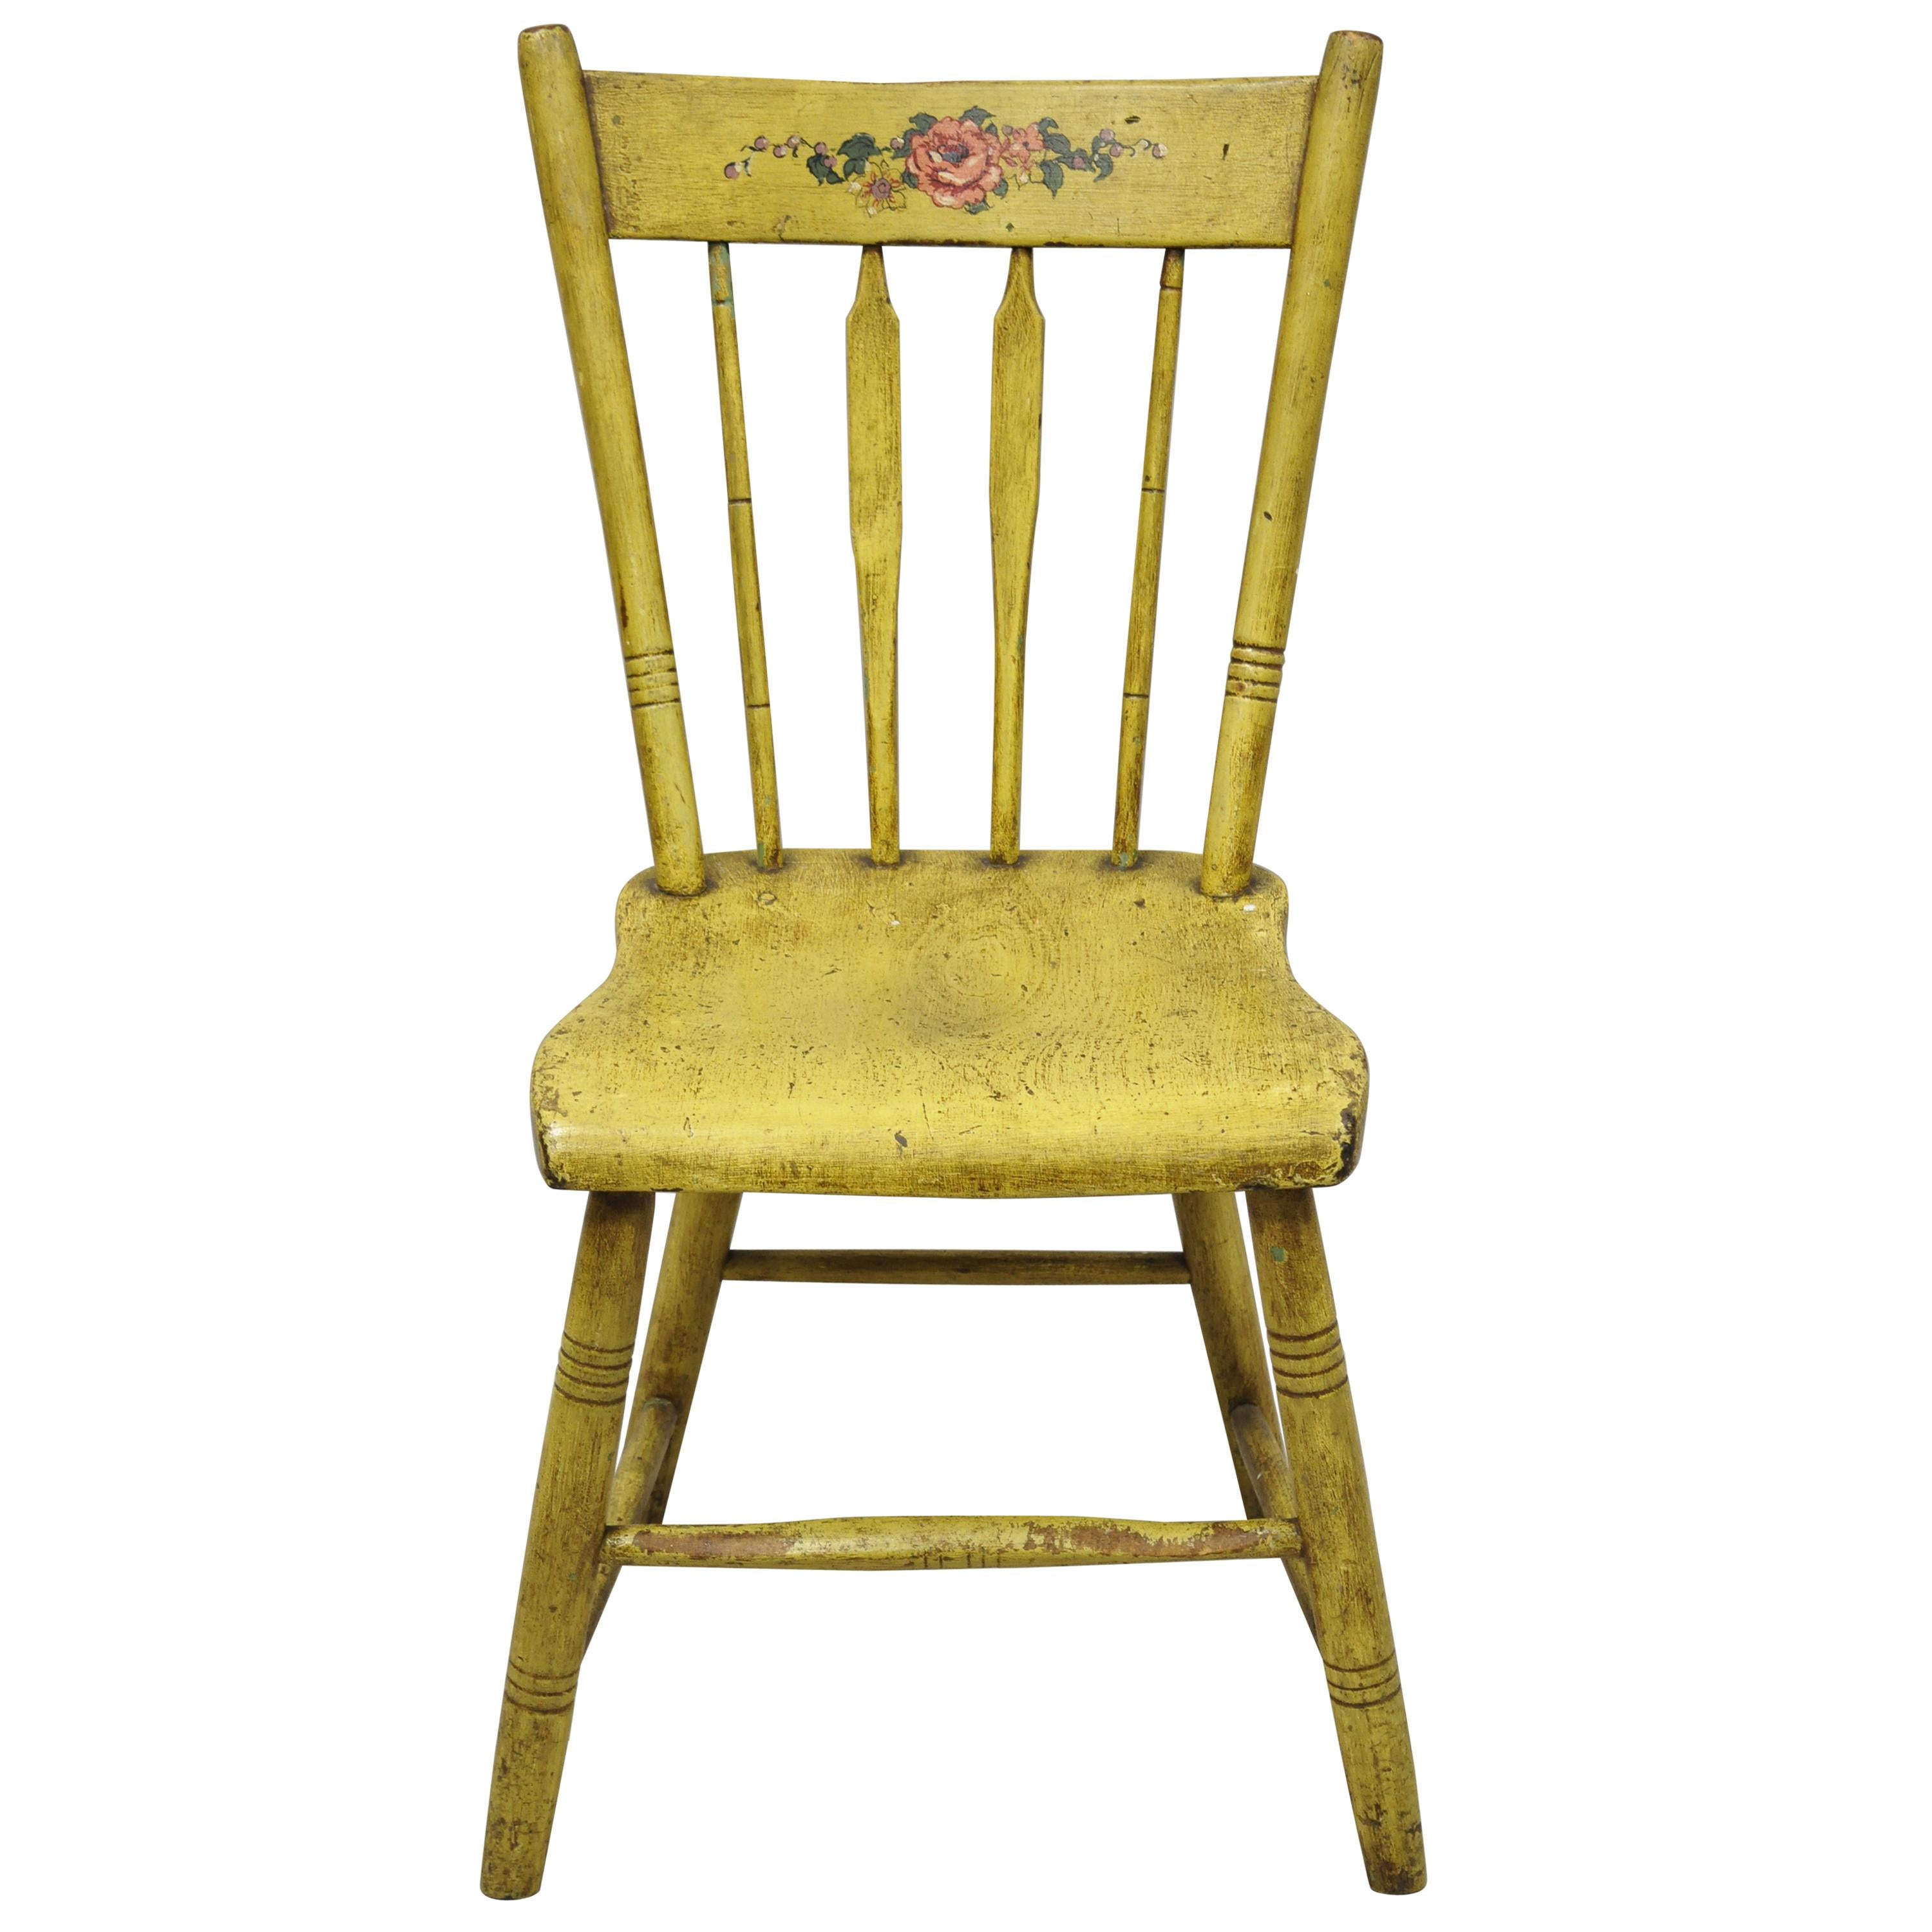 Frederick Loeser & Co Yellow American Primitive Hitchcock Painted Side Chair 'A'